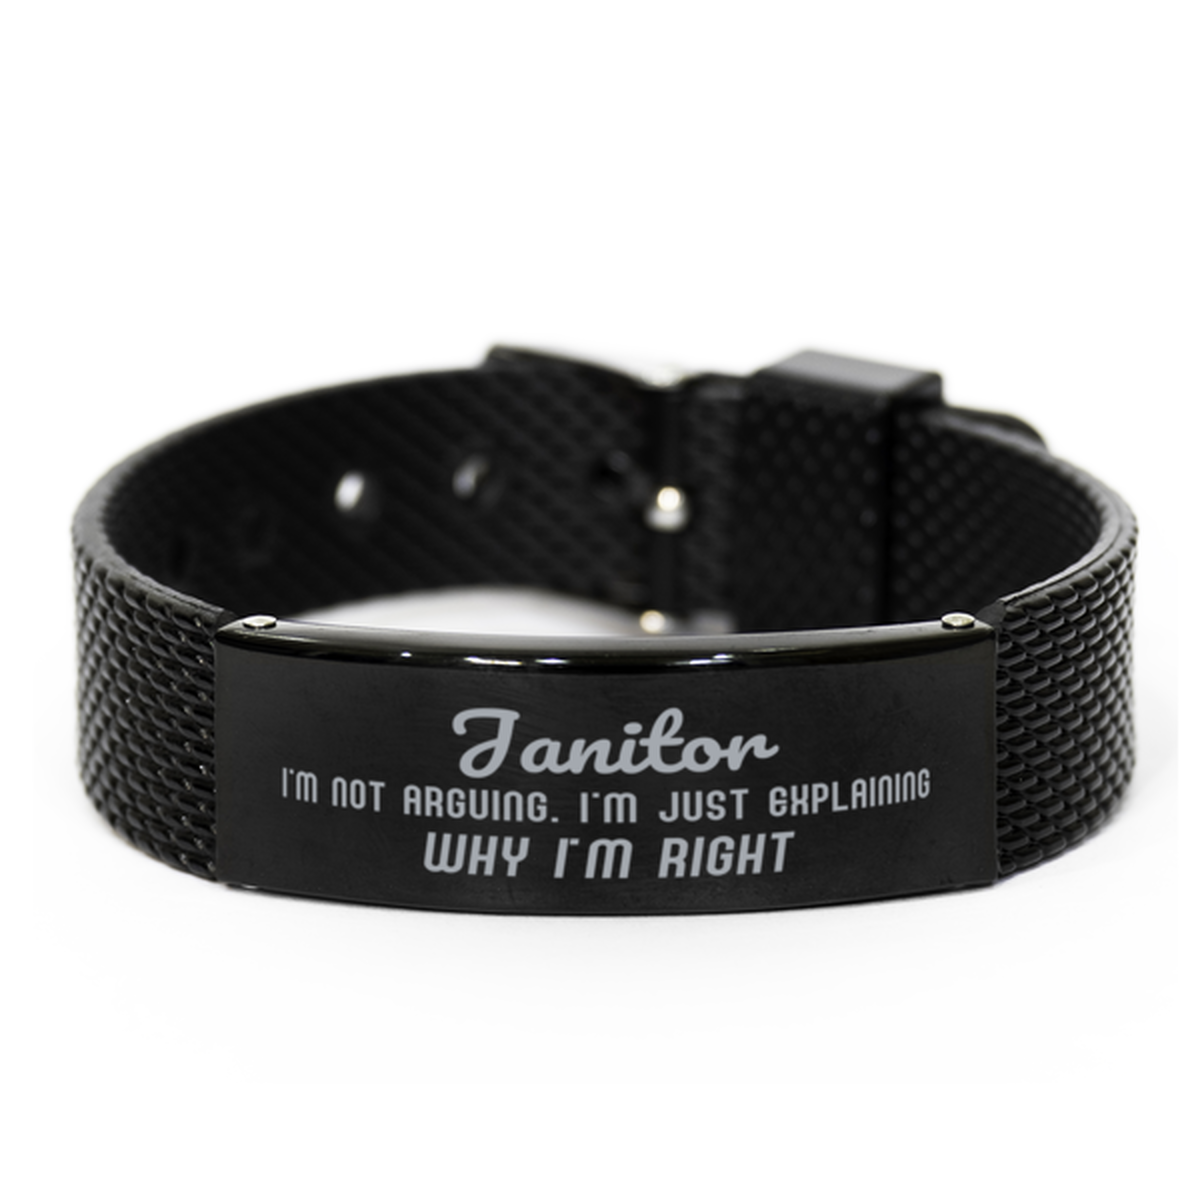 Janitor I'm not Arguing. I'm Just Explaining Why I'm RIGHT Black Shark Mesh Bracelet, Funny Saying Quote Janitor Gifts For Janitor Graduation Birthday Christmas Gifts for Men Women Coworker